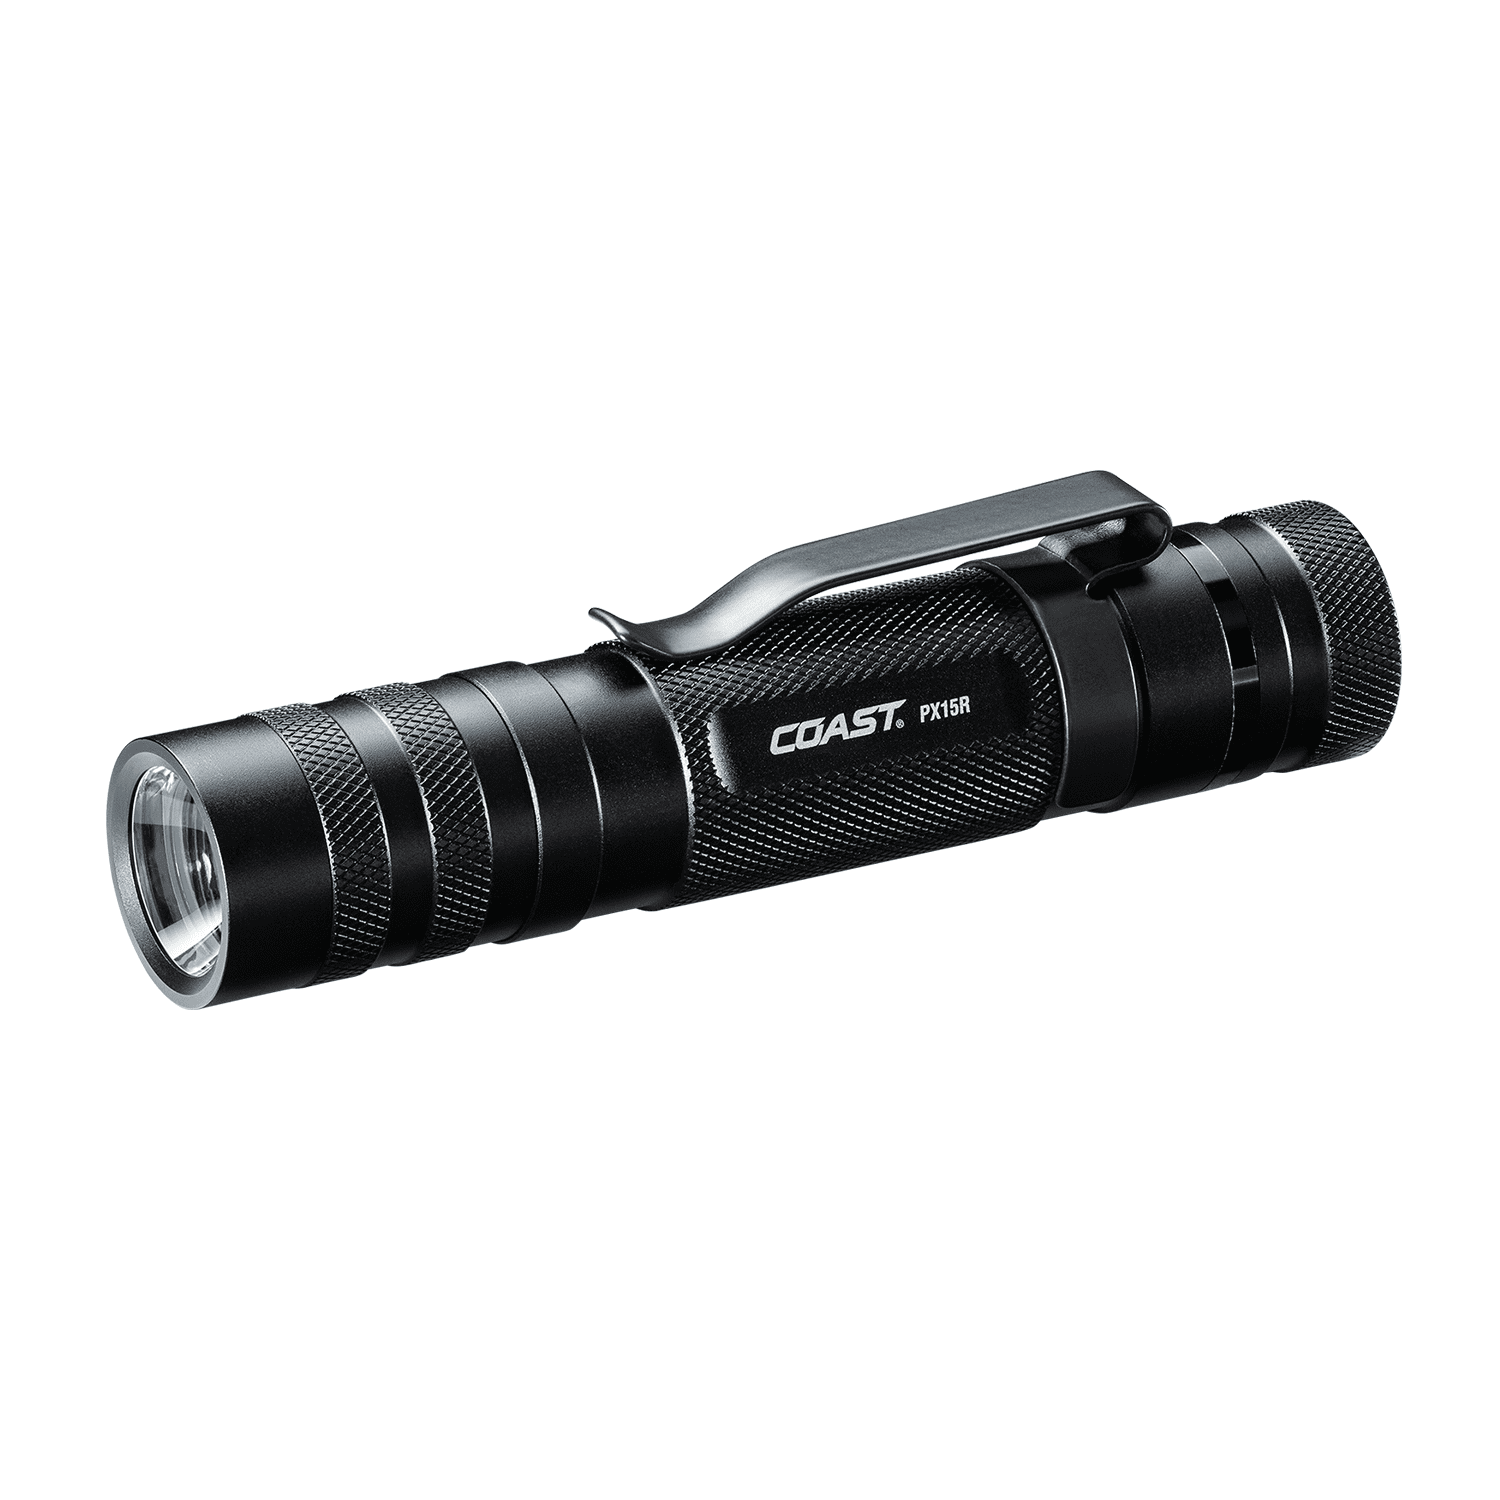 COAST PX15R 1000 Lumen Rechargeable Dual Power IP54 Rated LED Flashlight